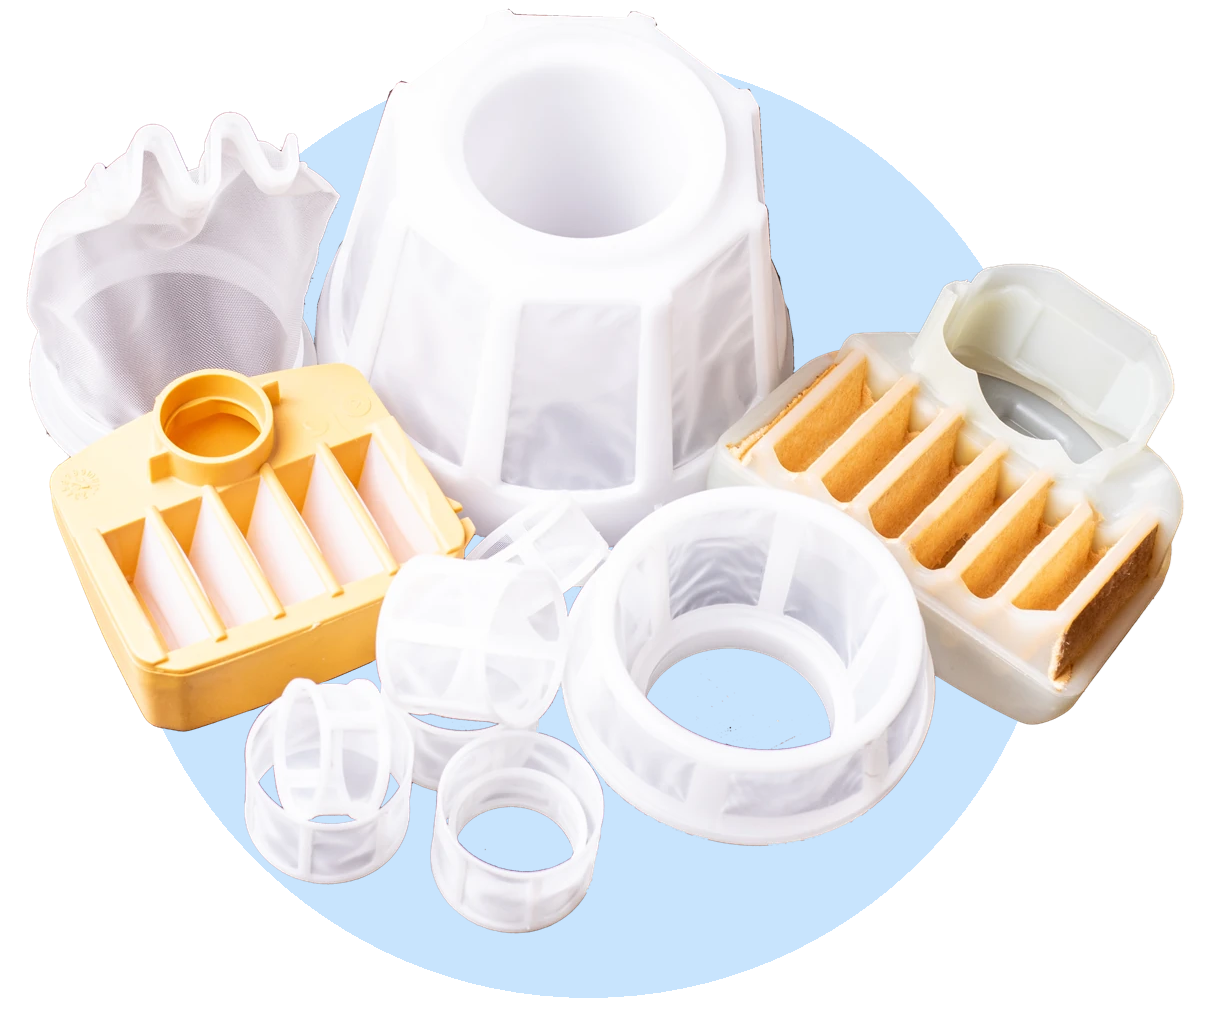 A collection of different filters manufactured at Essge-Plast